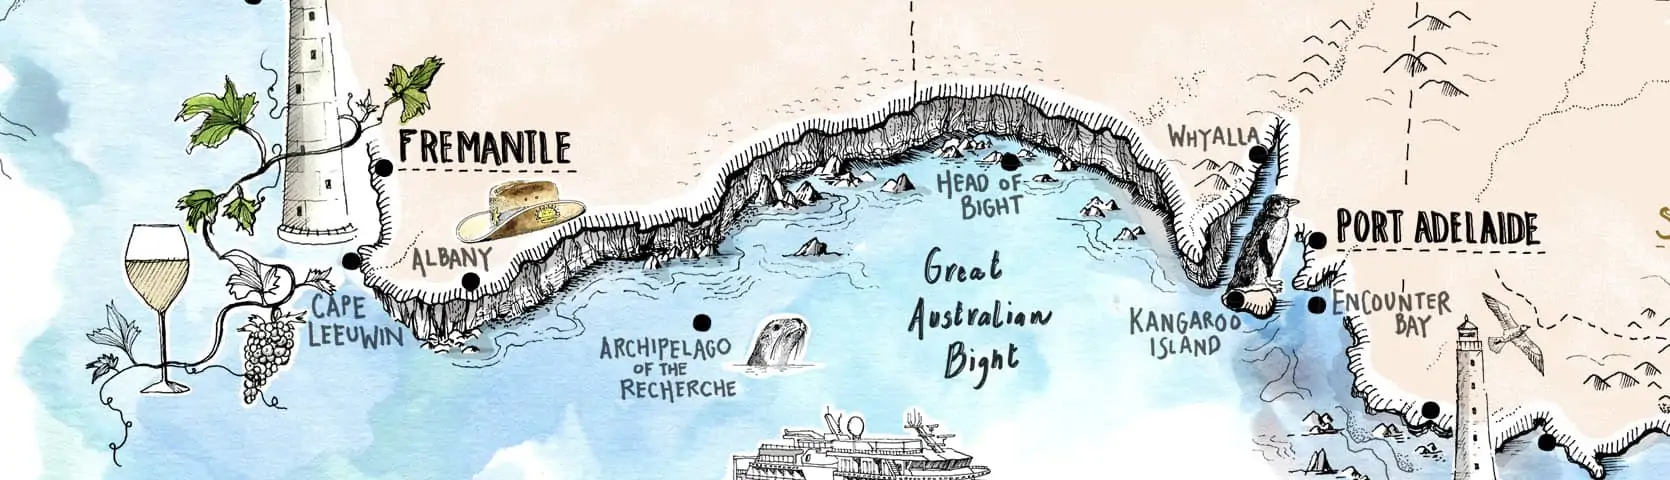 CORAL GEOGRAPHER South-Australia-Itineraries-Banner-1